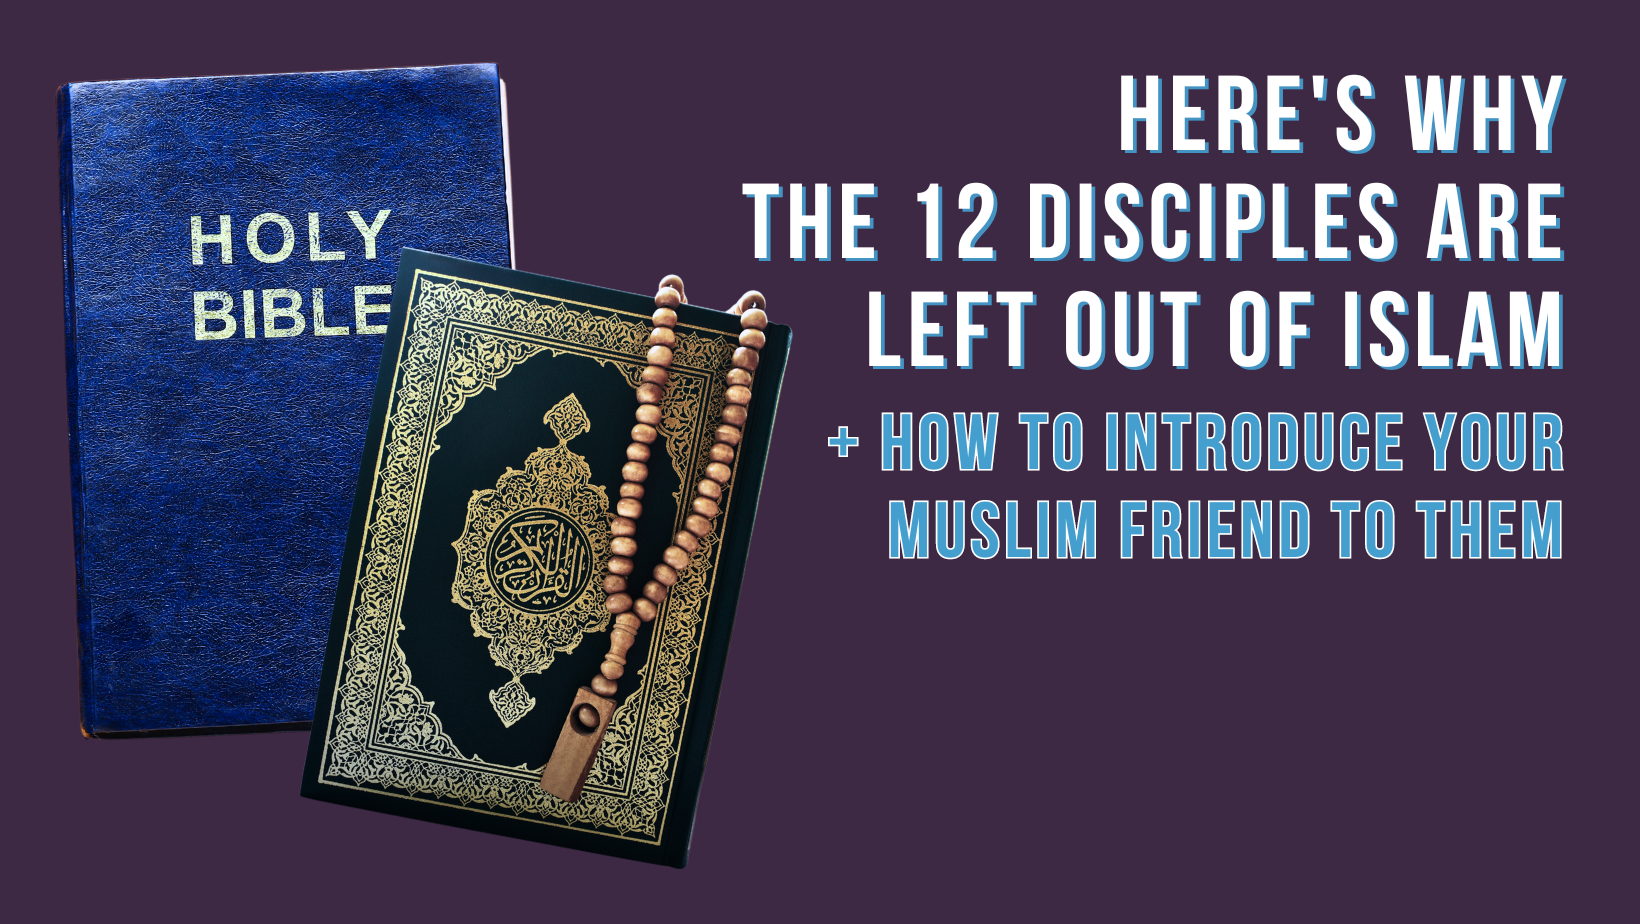 Here's why the 12 disciples are left out of Islam + how to introduce your Muslim friend to them